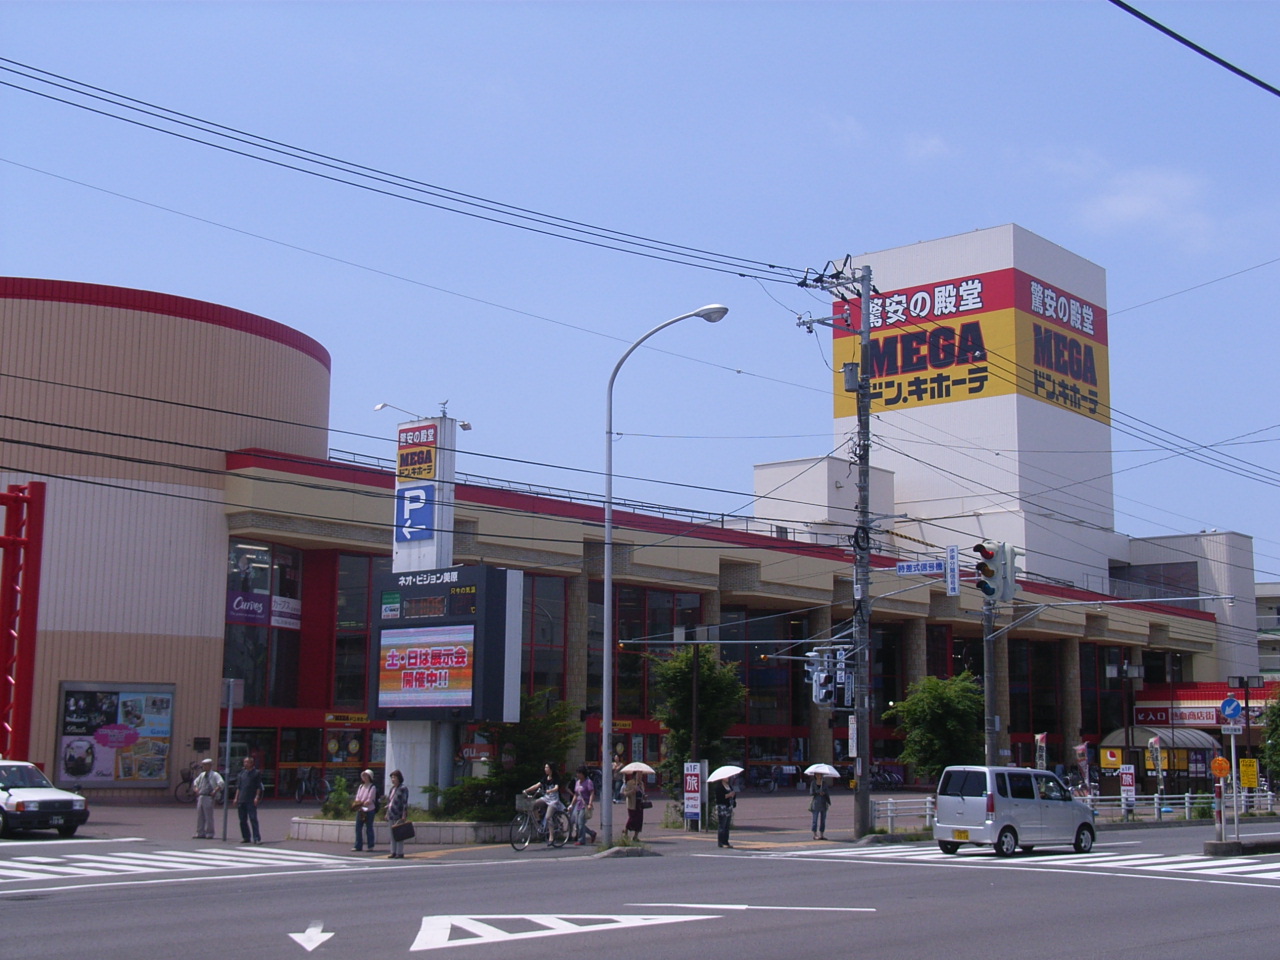 Shopping centre. MEGA Don ・ 1851m until Quijote Hakodate store (shopping center)